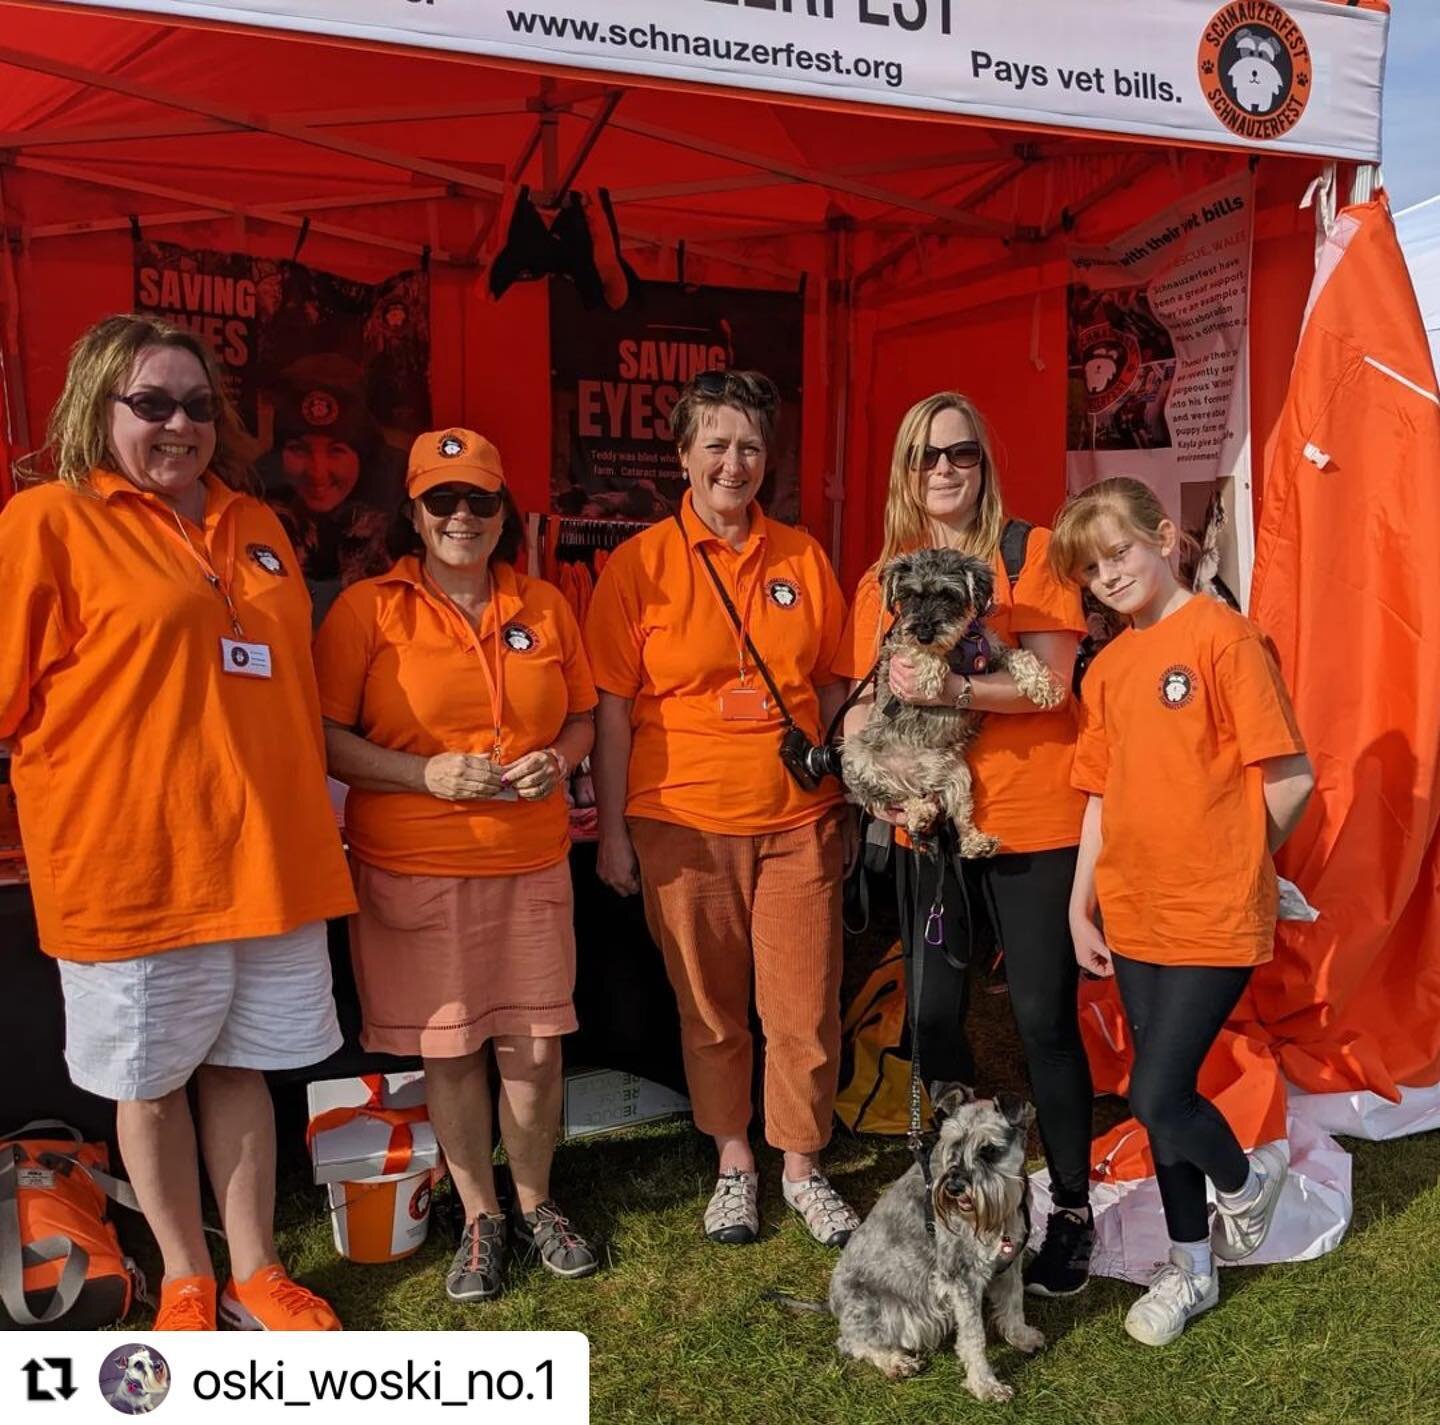 There were a gazillion great things about the weekend spent at @allaboutdogsshow 🙂 One major highlight was meeting some of the dogs who have been helped by #Schnauzerfest like Calli who is doing brilliantly with her brother Oscar and human family. 
